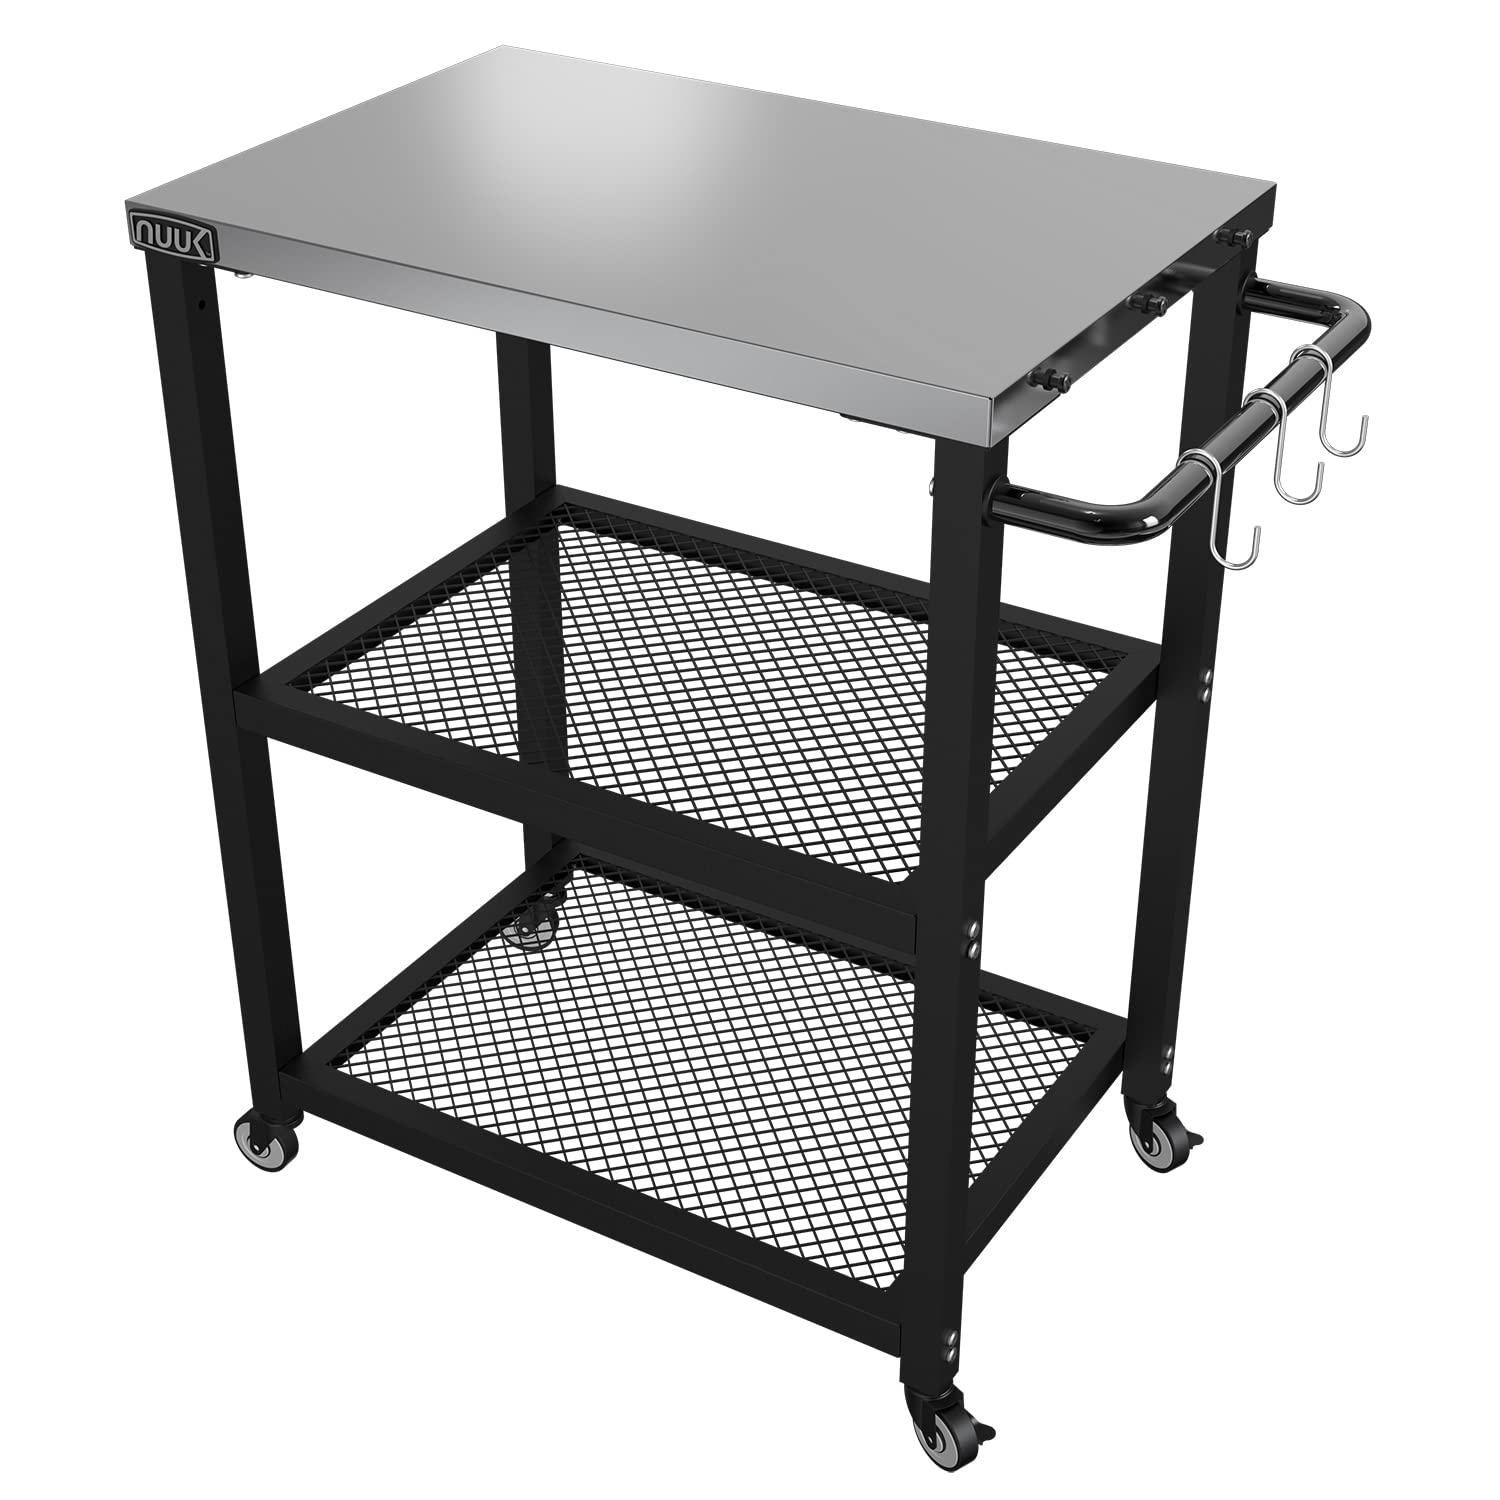 Nuuk Three-Shelf Rolling Outdoor Dining Cart Table, 16 X 24 Stainless Steel Commercial Multifunctional Kitchen Food Prep Worktab